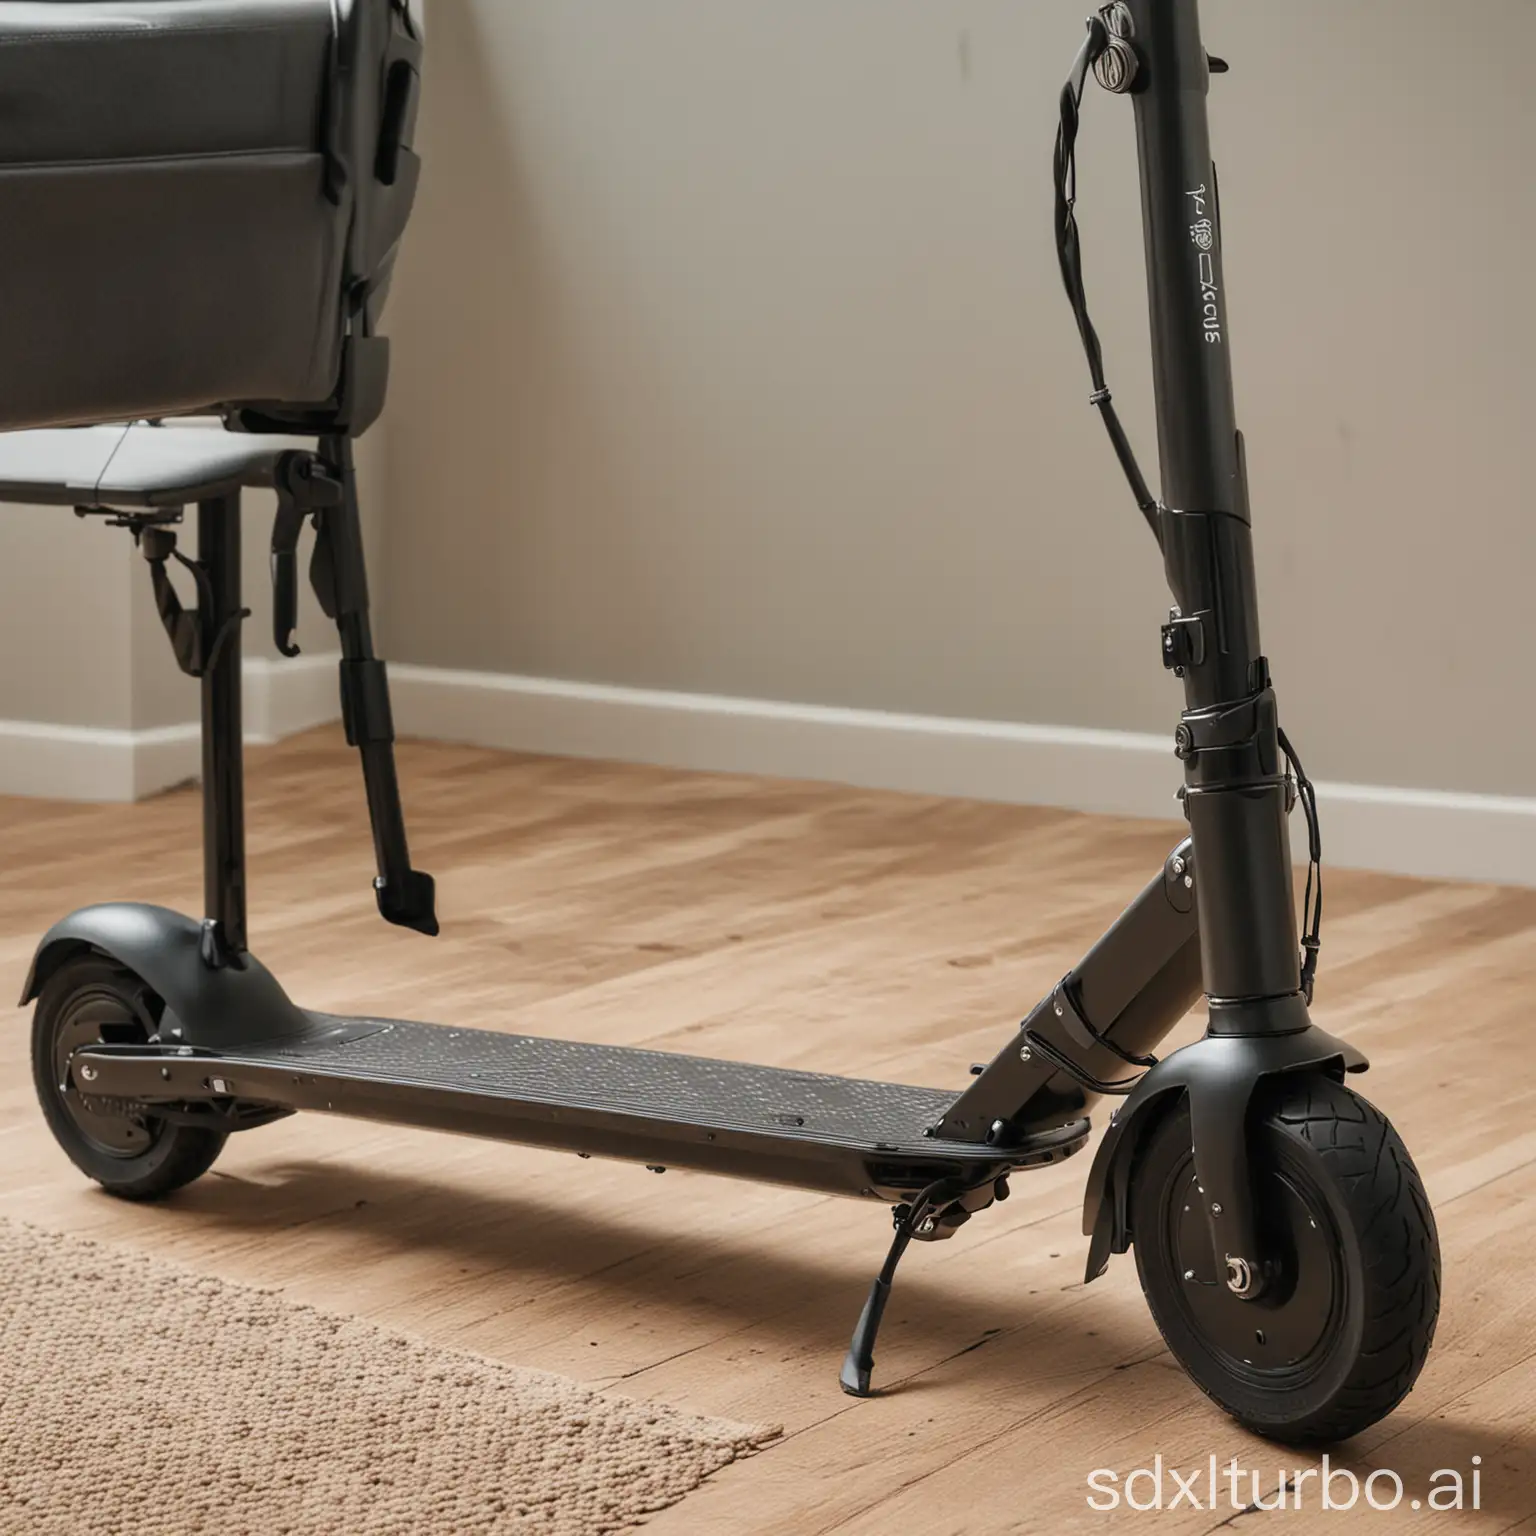 A close-up of a mobility scooter in a home. The scooter is sleek and stylish.